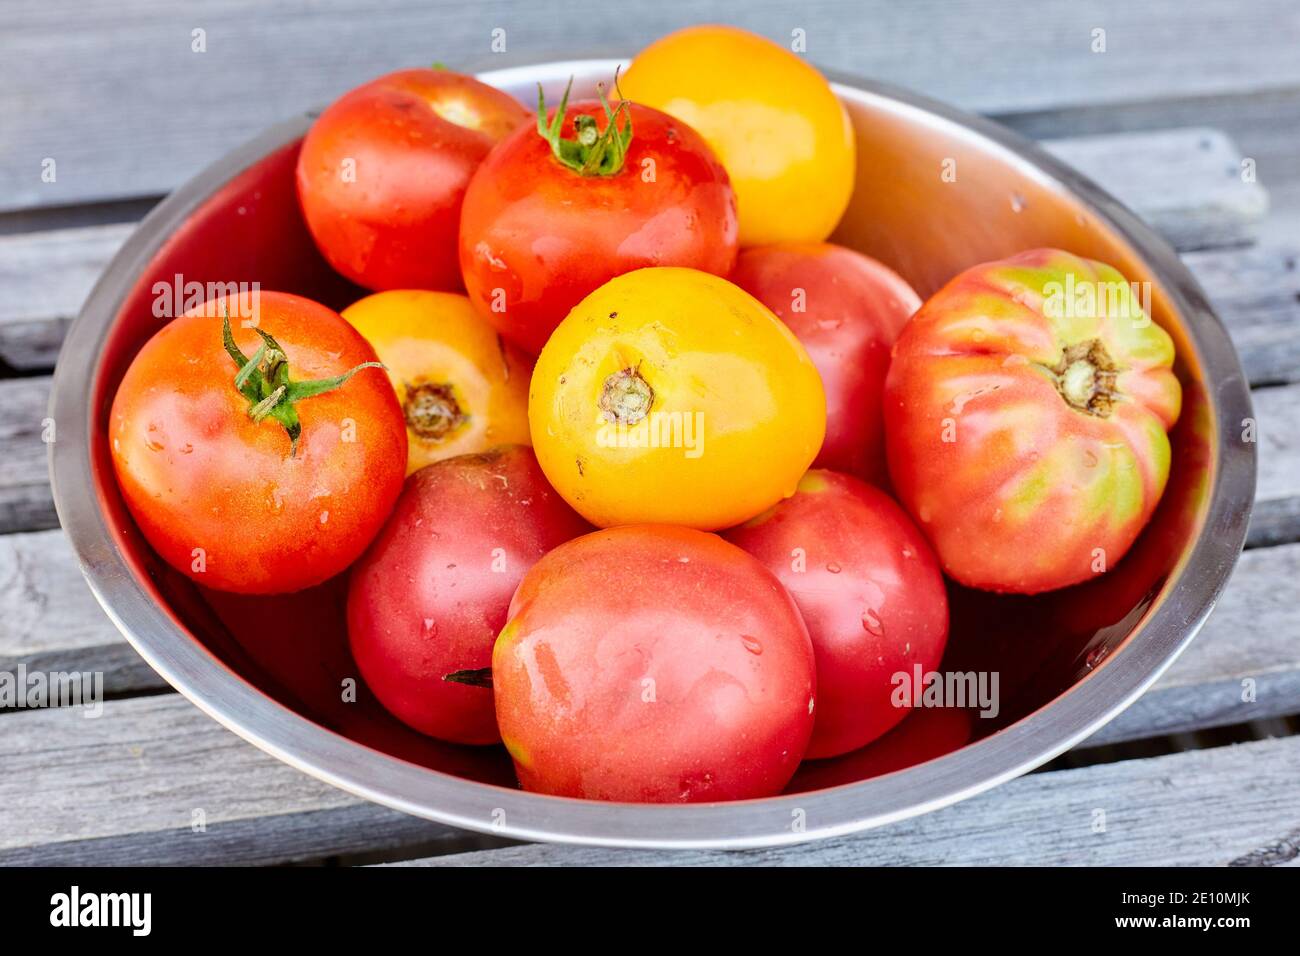 Stainless Steel Bowl of Fresh Tomatoes on Slatted Wood Surface 1 Stock Photo